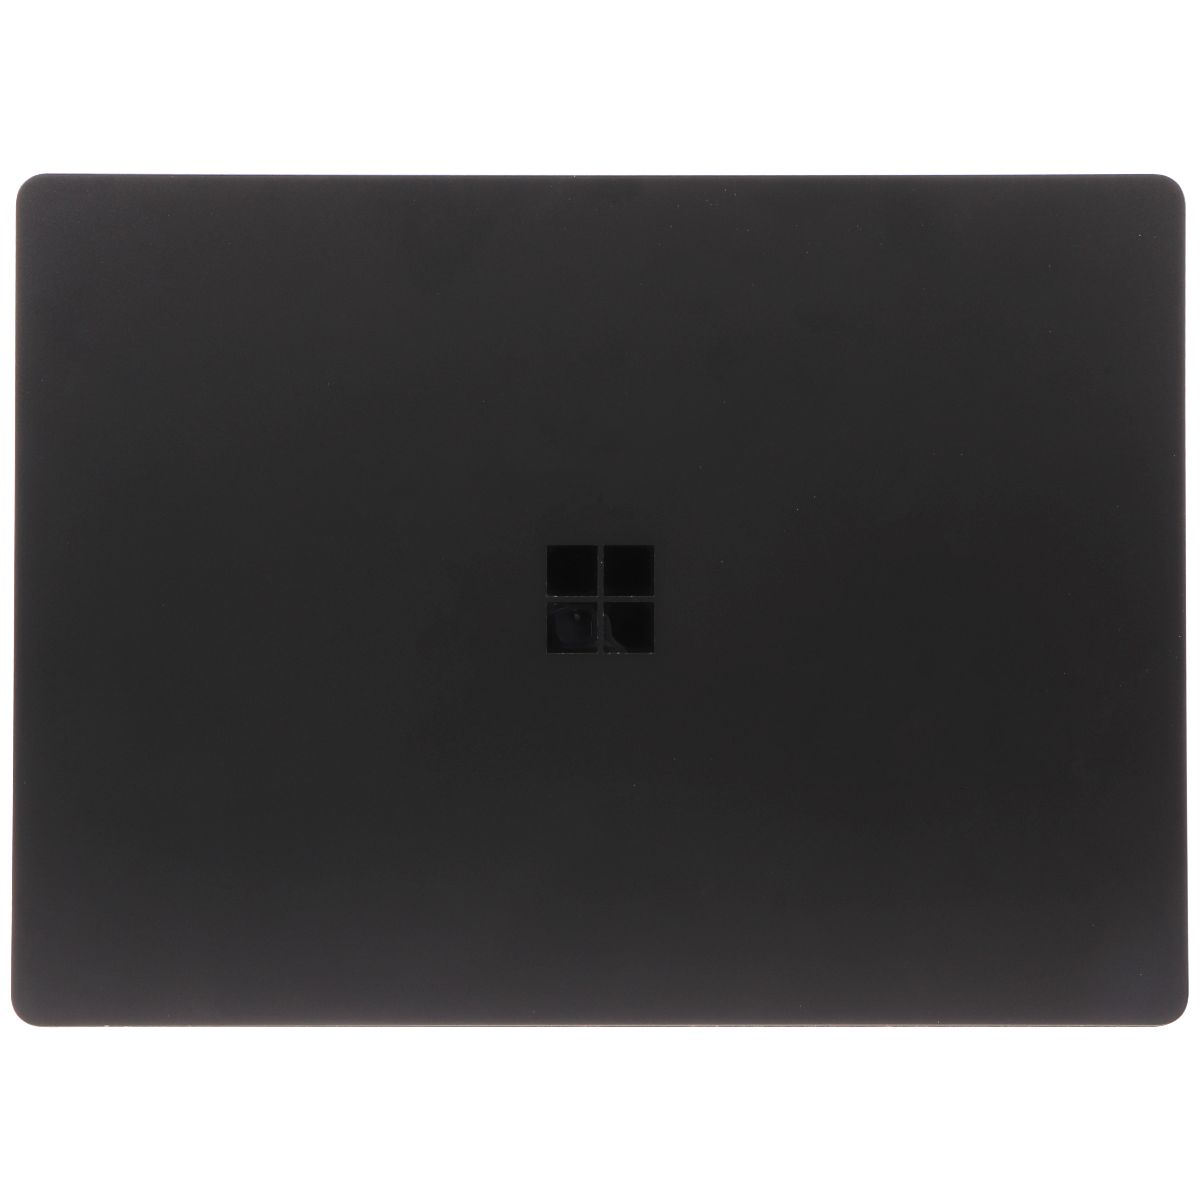 Microsoft Surface Laptop 4 (13.5-in) 1951 (i5-1135G7/512GB SSD/8GB) Black Win 11 Laptops - PC Laptops & Netbooks Microsoft    - Simple Cell Bulk Wholesale Pricing - USA Seller